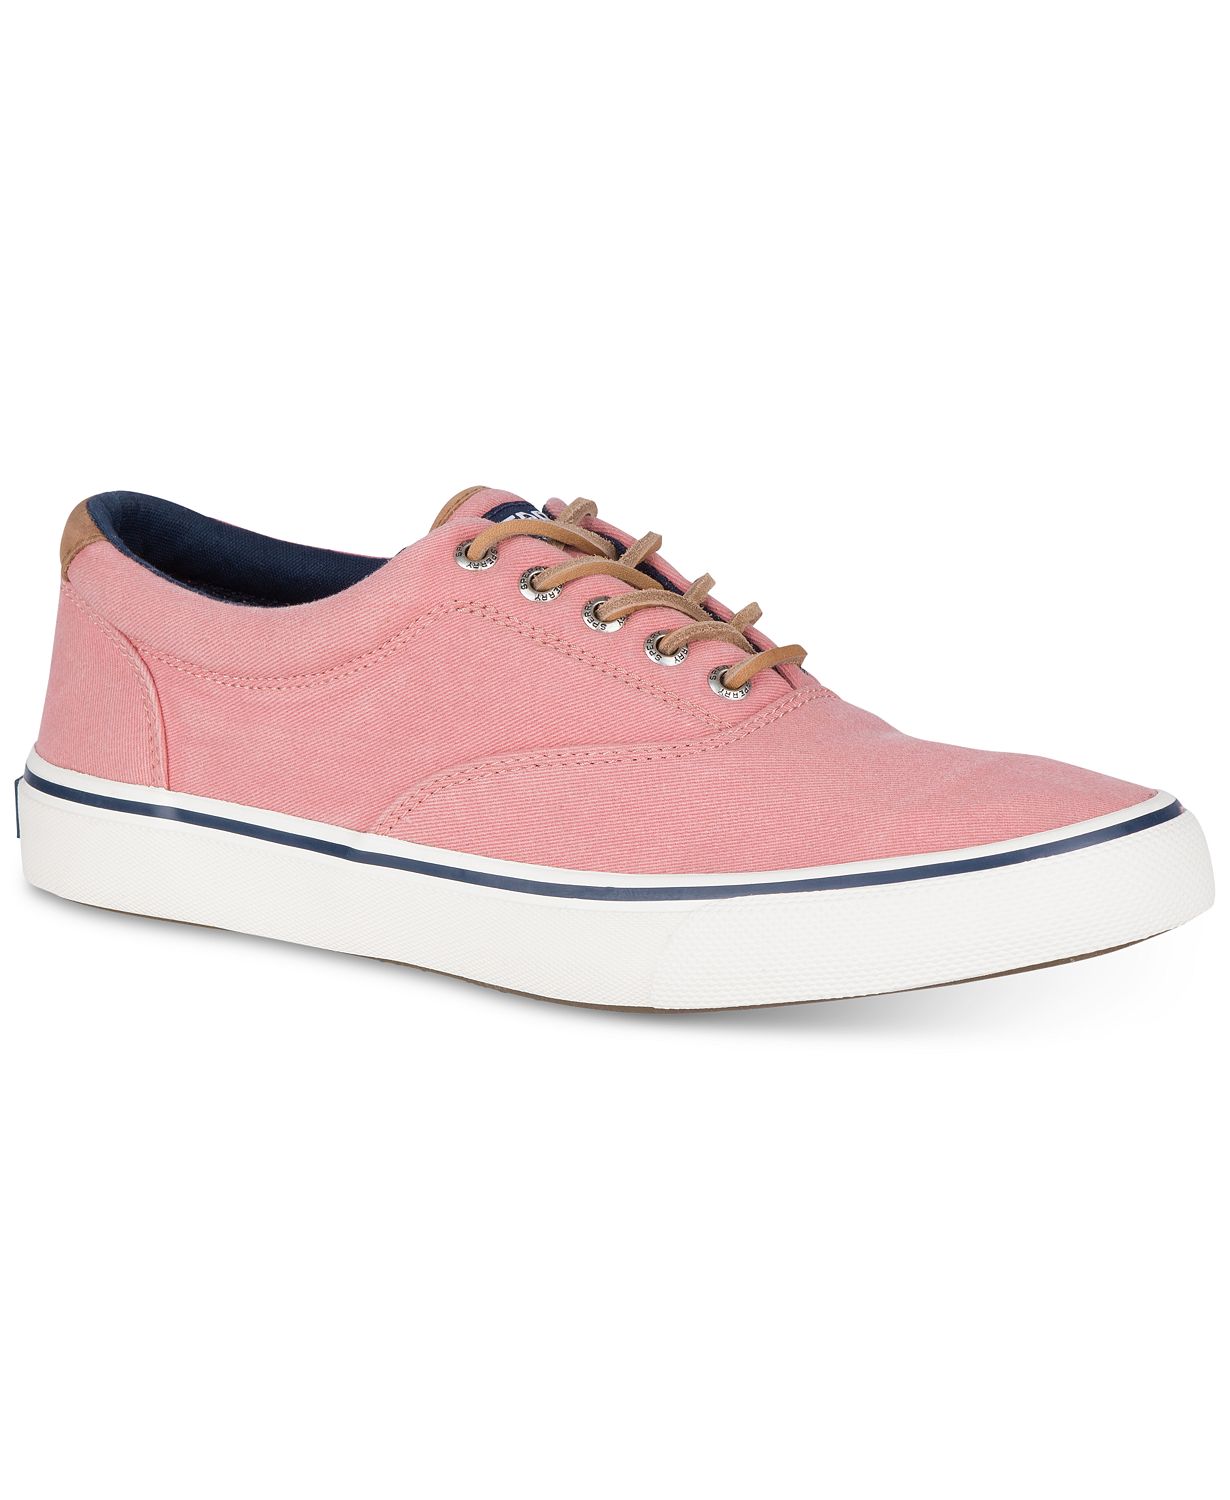 Flash Sale: 75% off Shoes including Sperry, The North Face, + MORE!